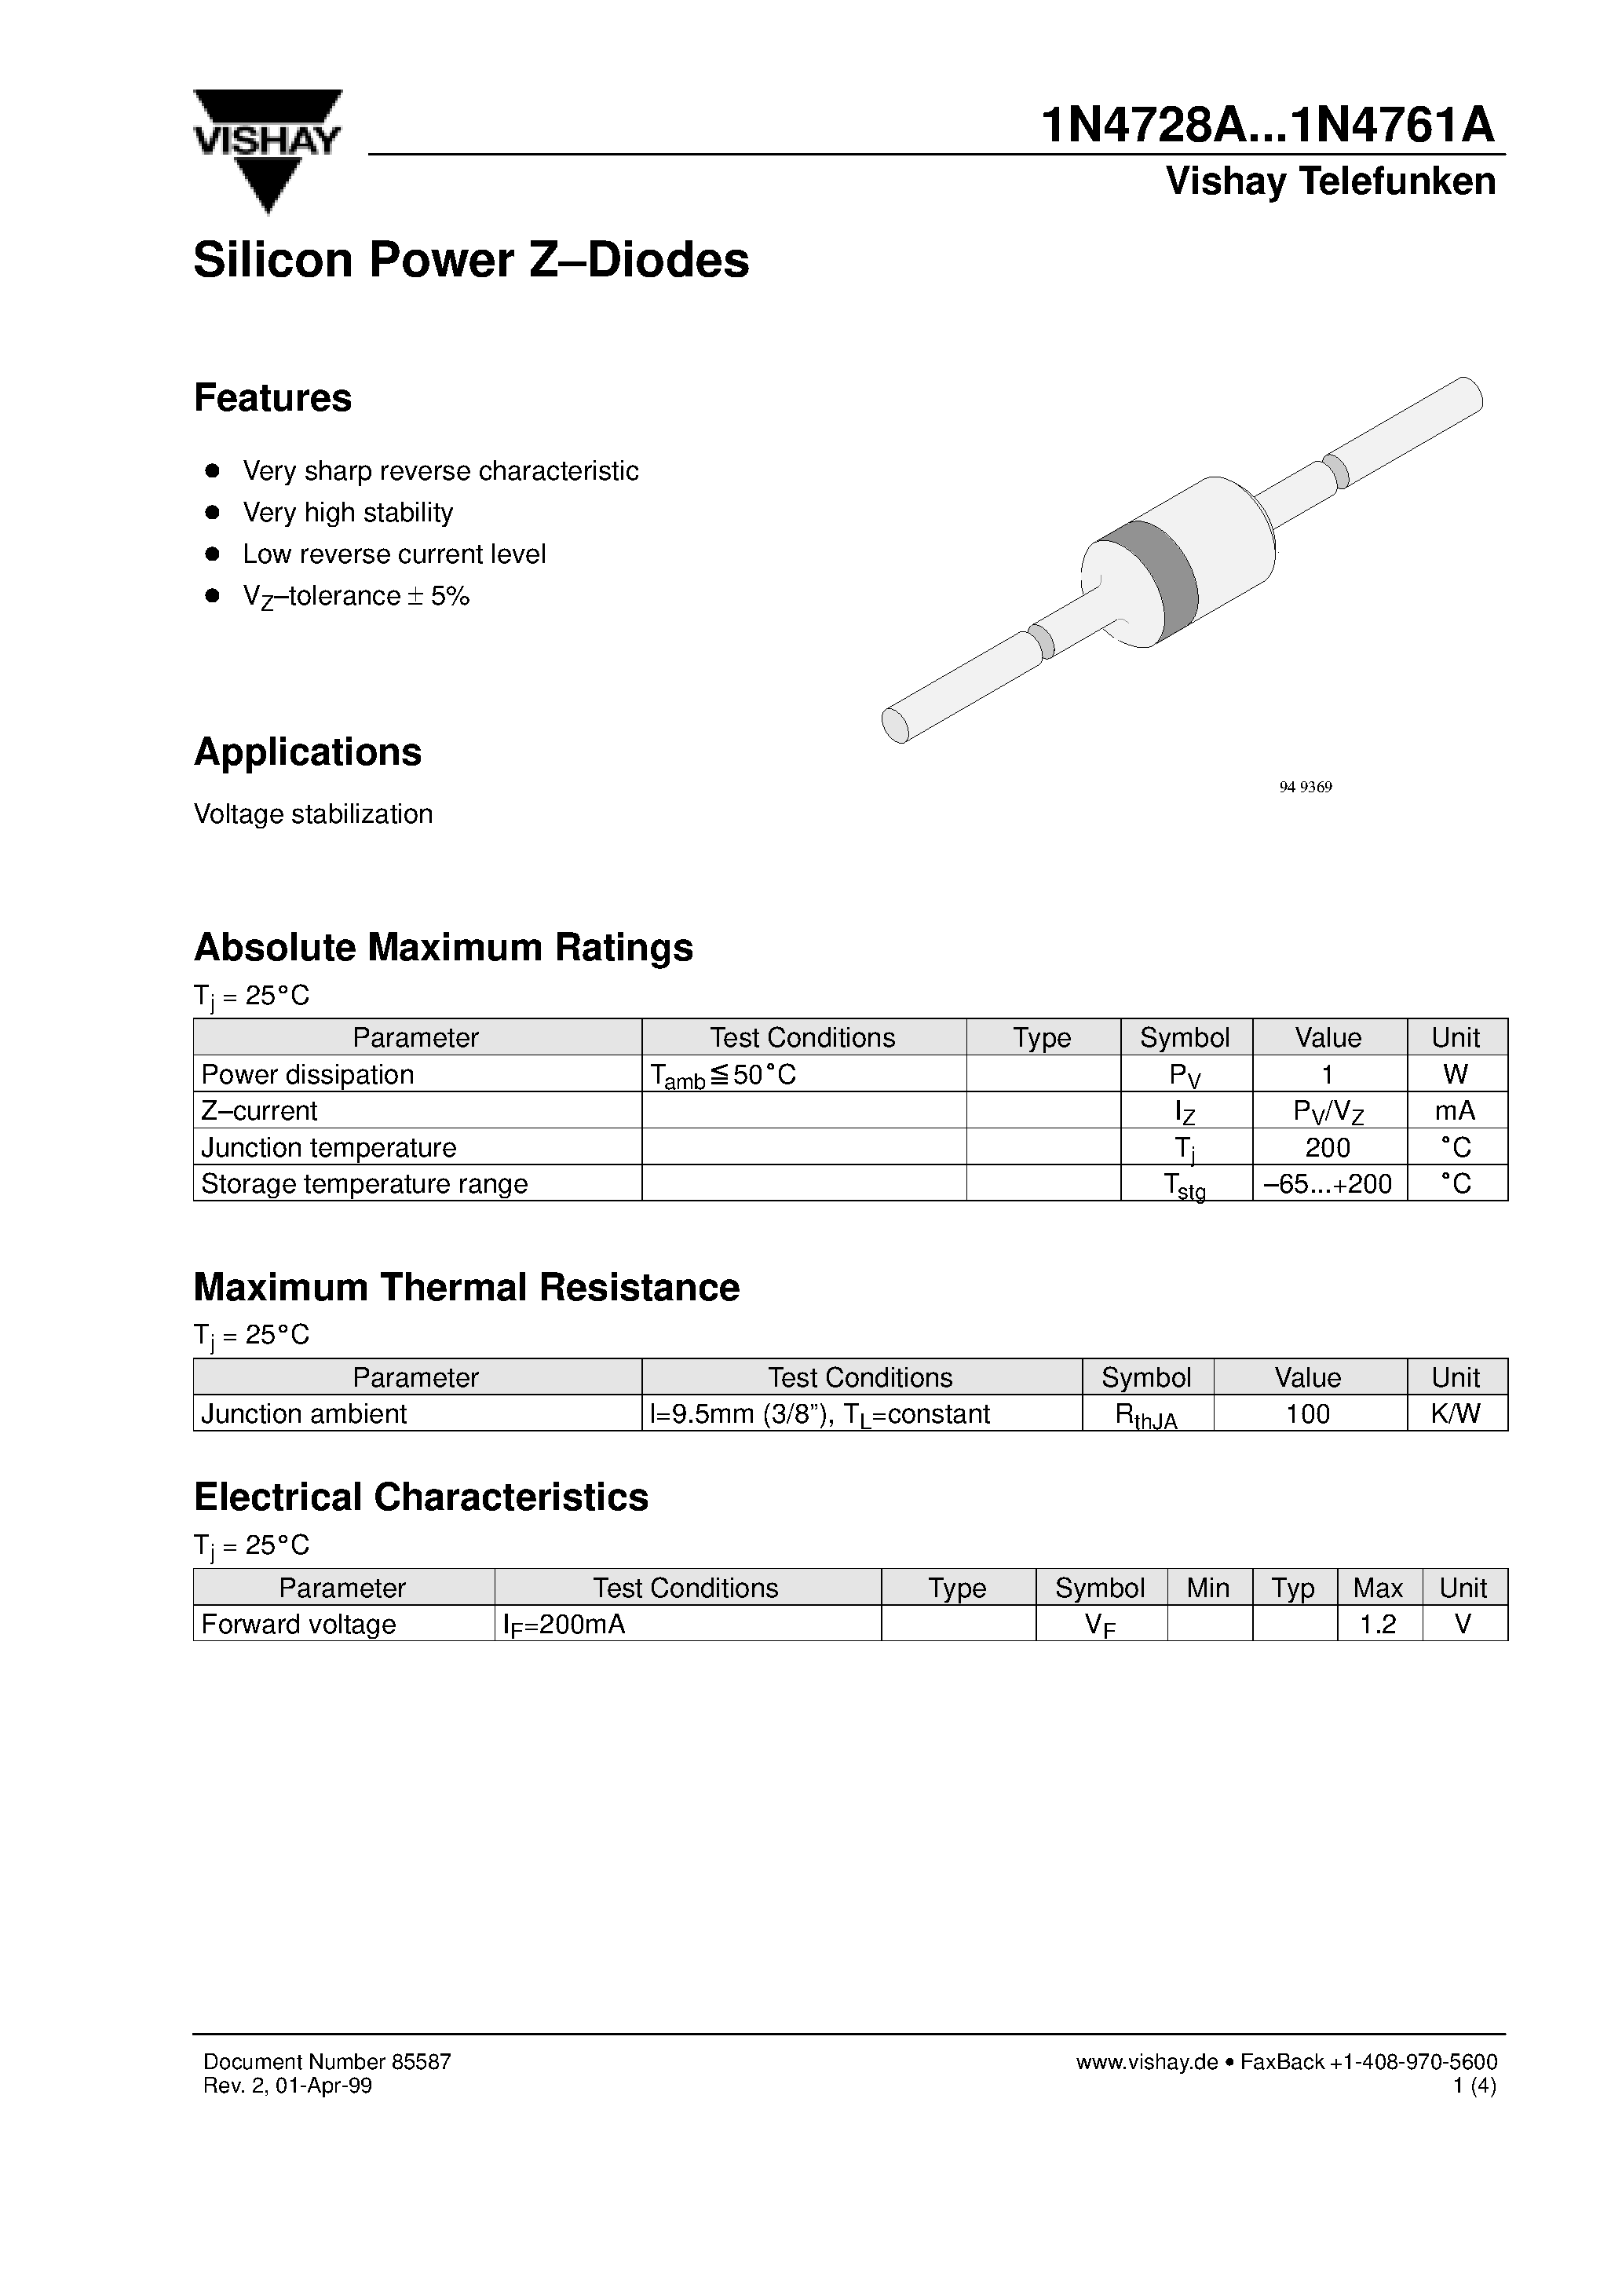 Даташит 1N4752A - Silicon Power Z-Diodes страница 1